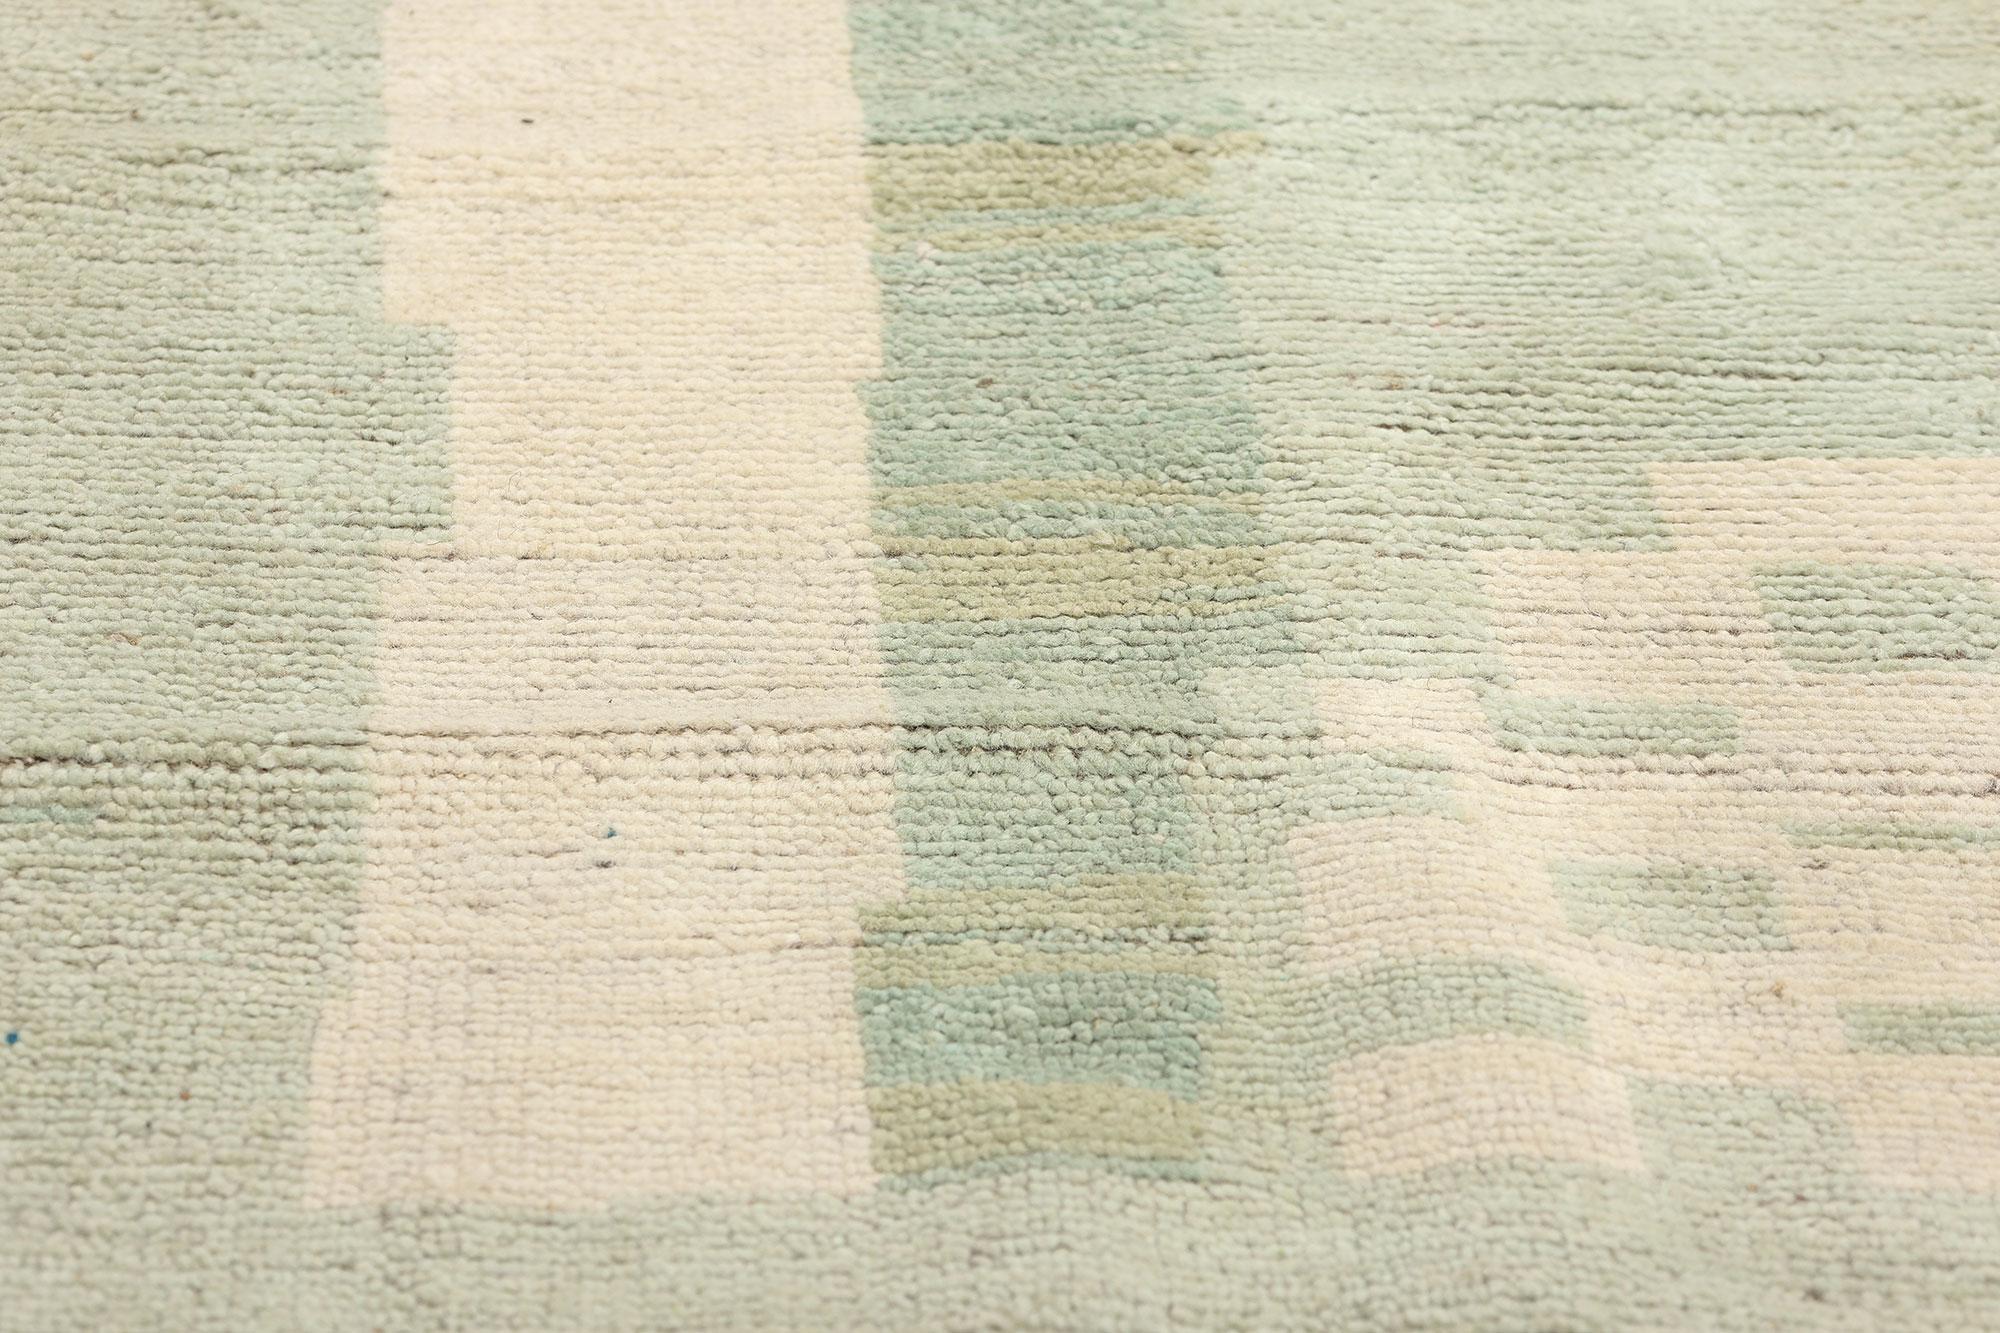 Organic Modern Brutalist Celadon Moroccan Rug, Biophilic Design Meets Brutalism In New Condition For Sale In Dallas, TX